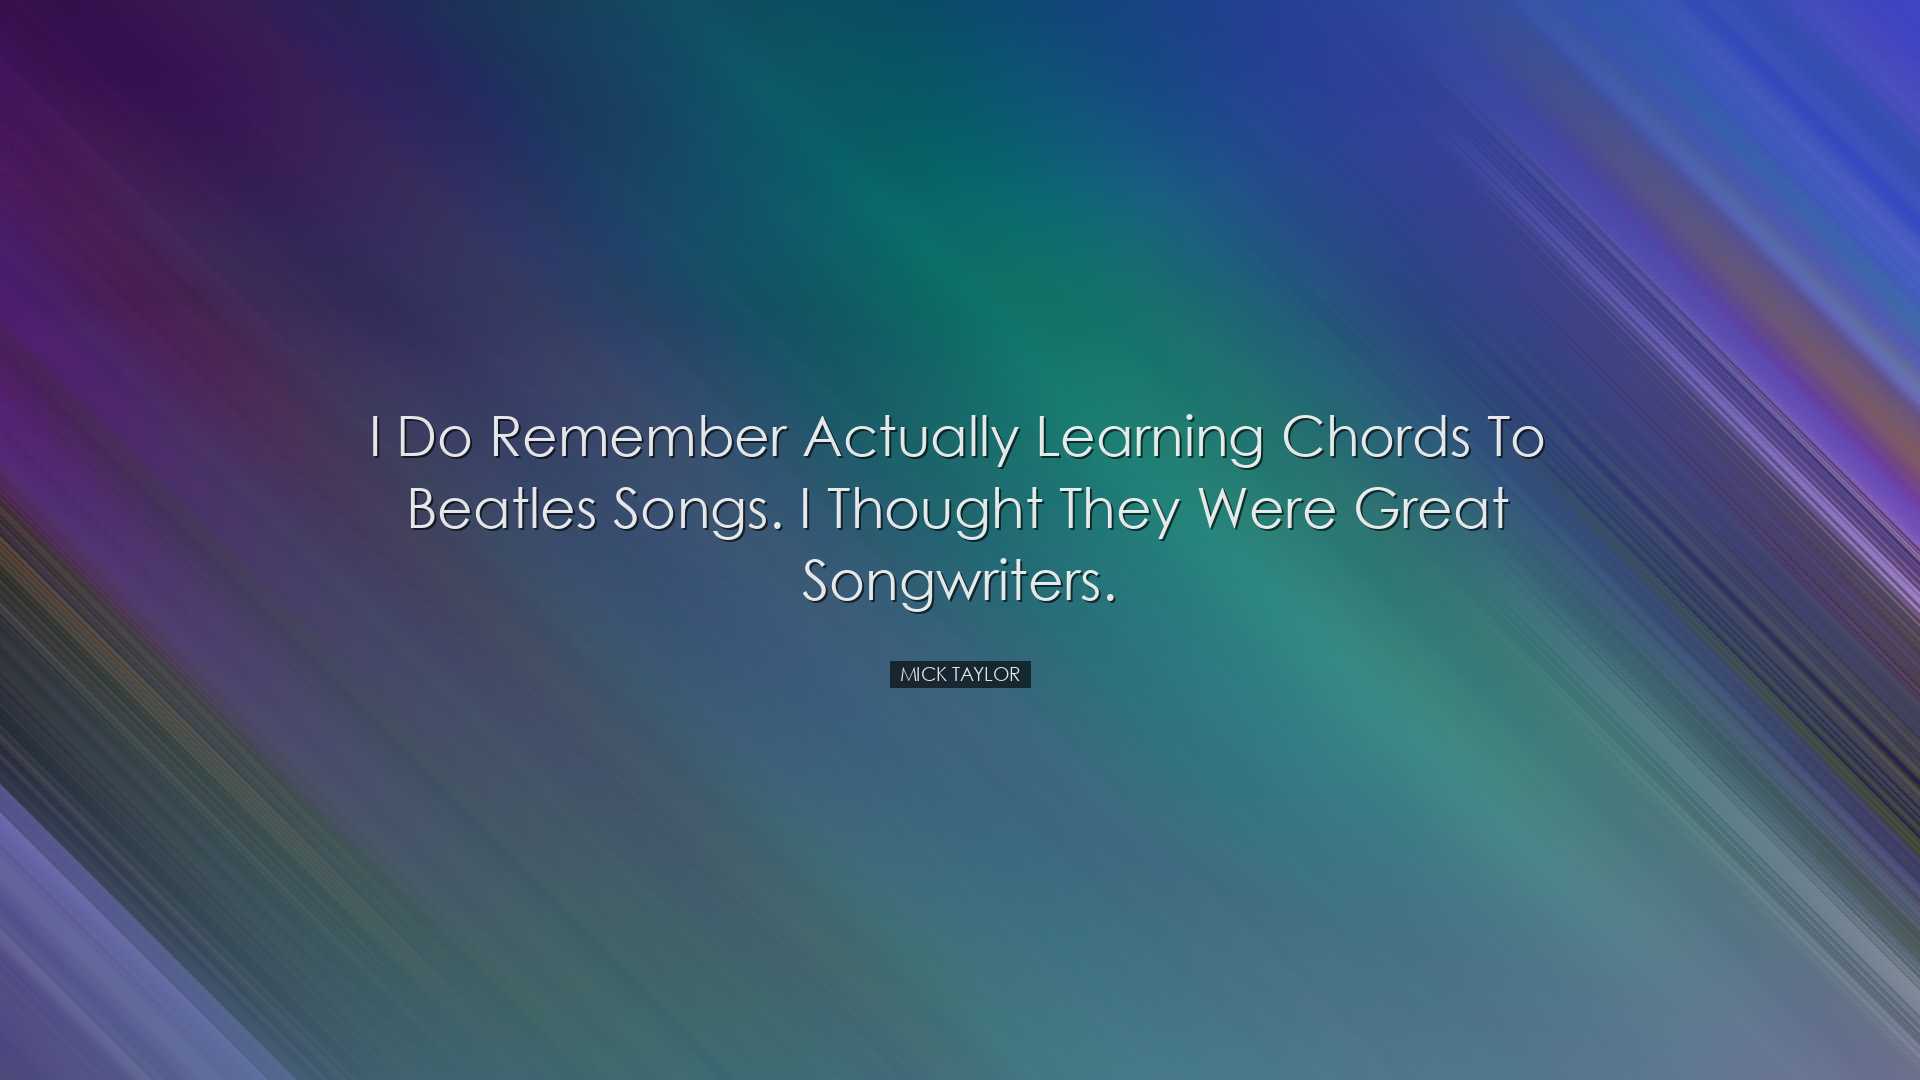 I do remember actually learning chords to Beatles songs. I thought